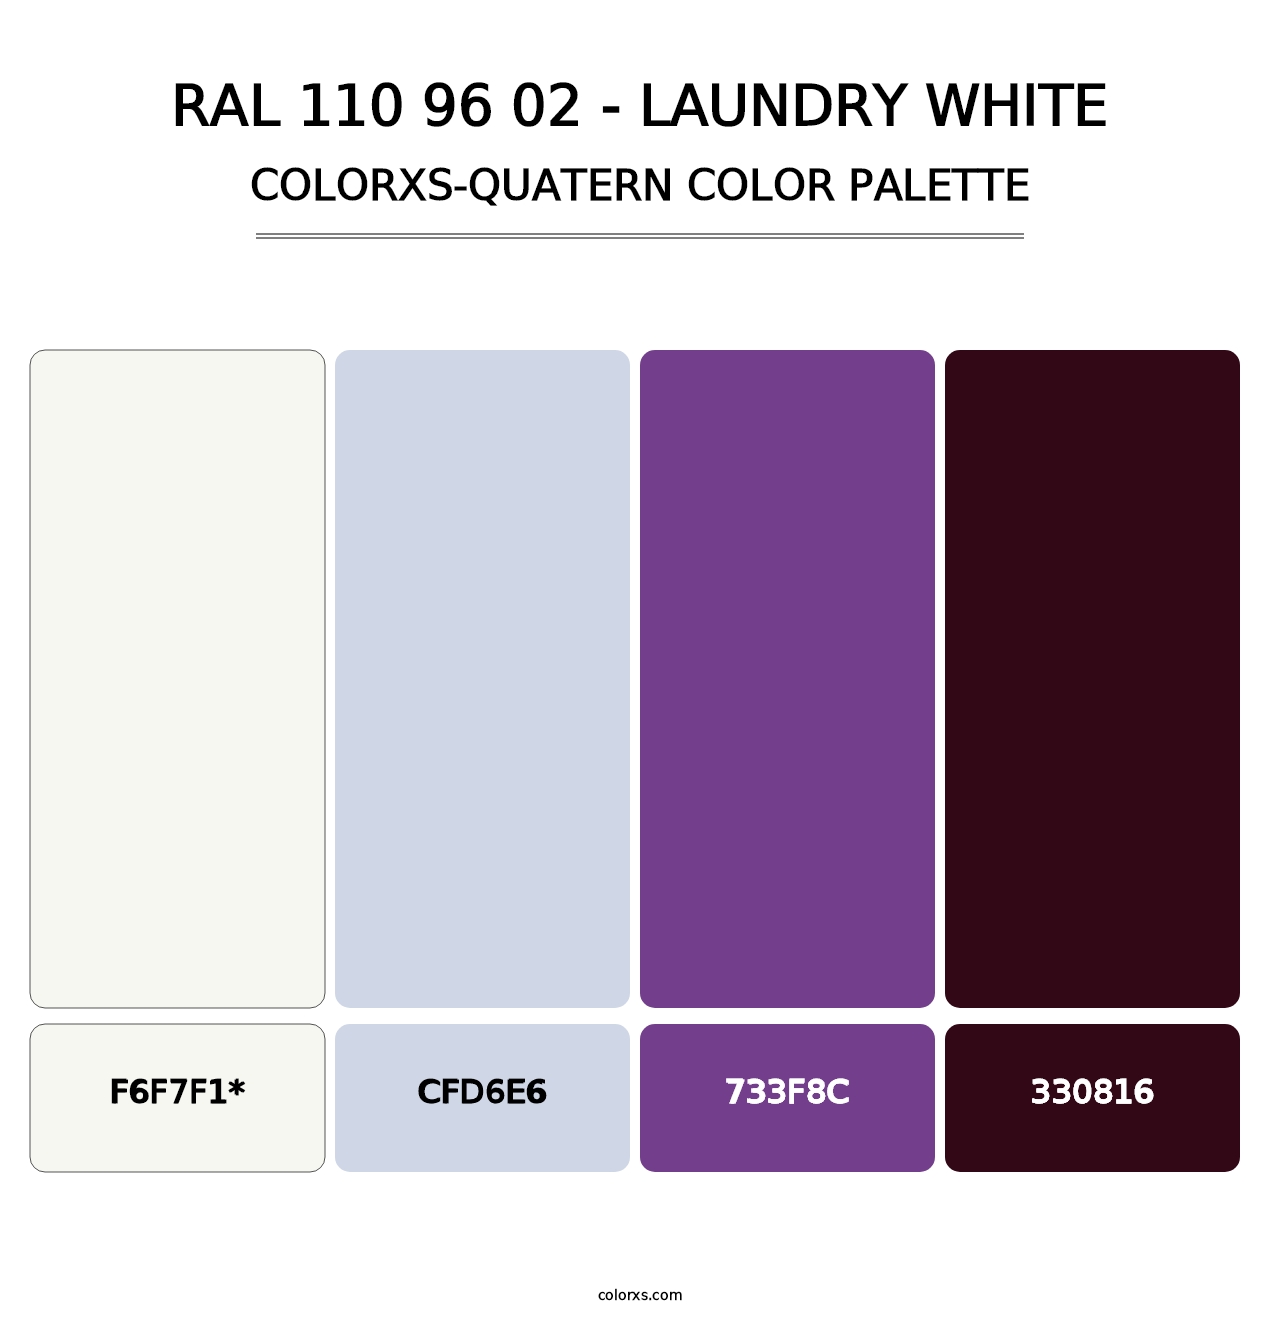 RAL 110 96 02 - Laundry White - Colorxs Quatern Palette